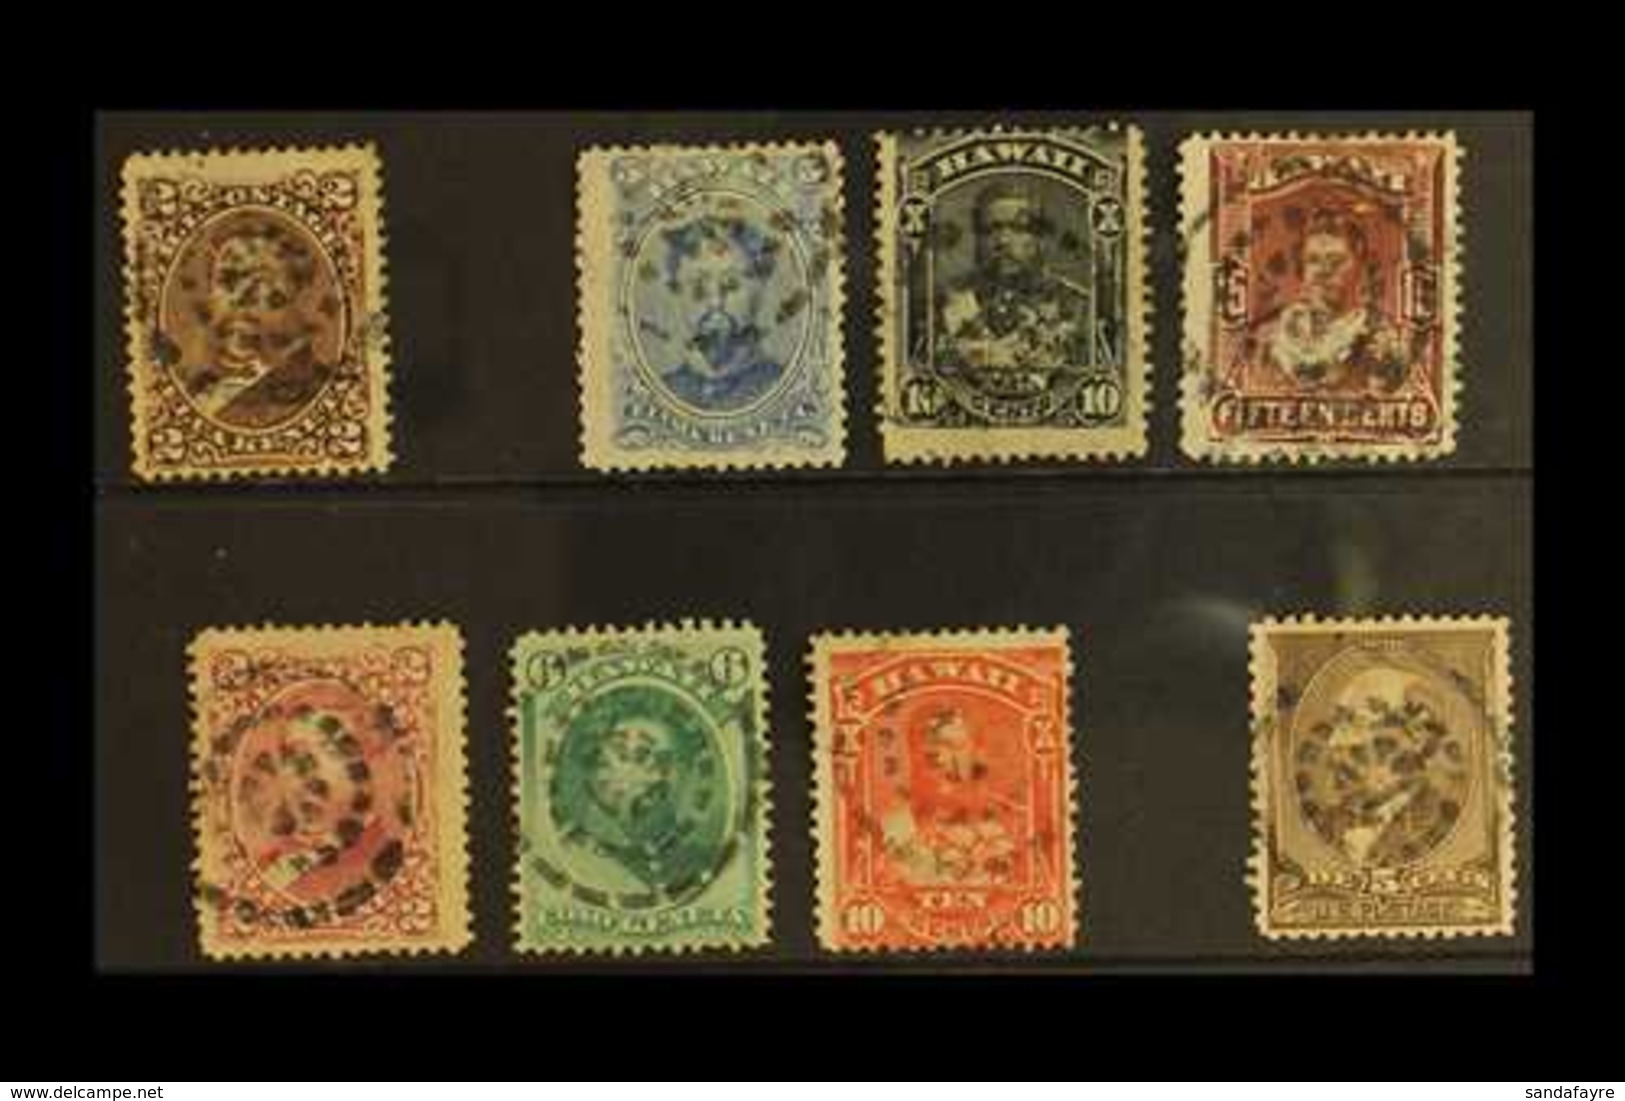 POSTMARKS DISTINCTIVE TARGET STYLE CANCEL On Range Of 1875-86 Issues, All Different With Values To 15c, Plus USA 1882 5c - Hawaii